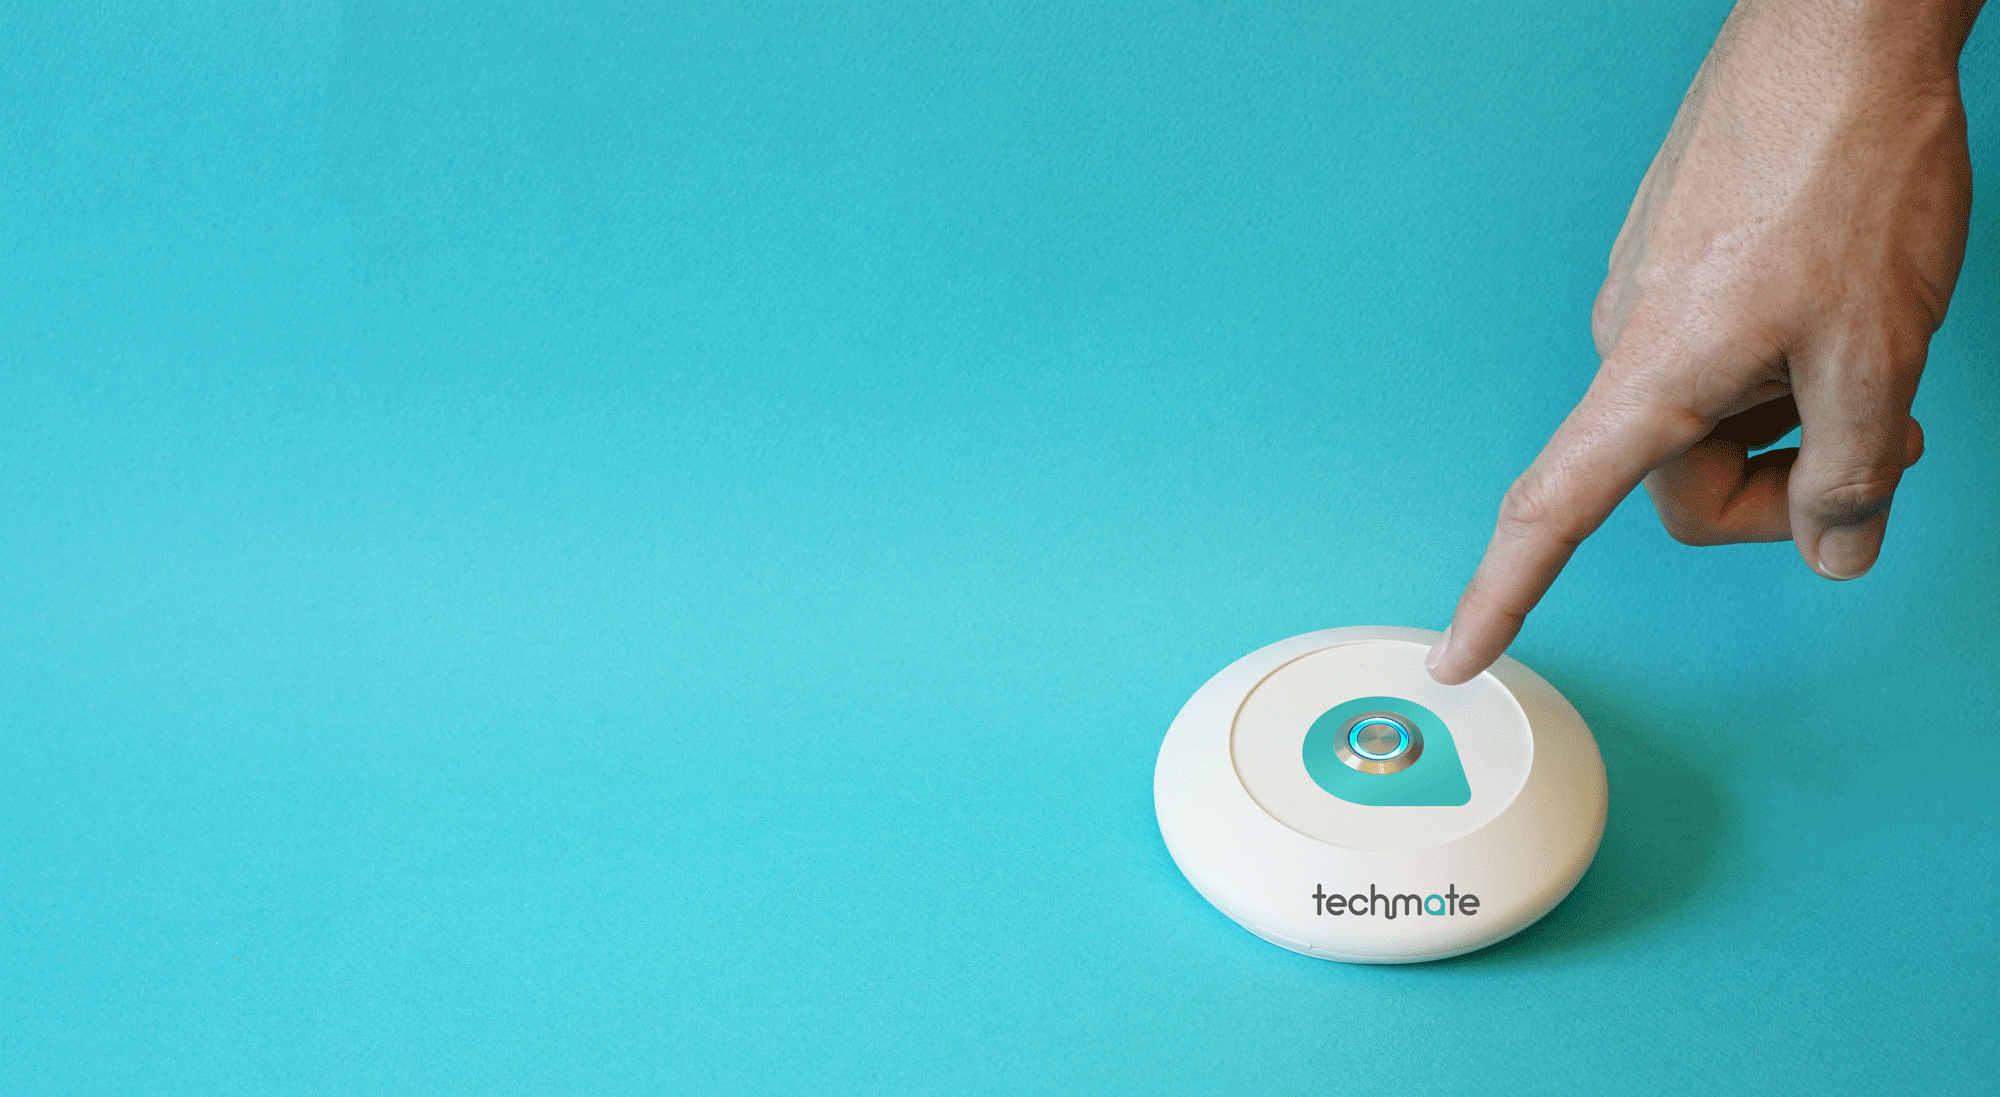 Techmate's Internet of Things button.